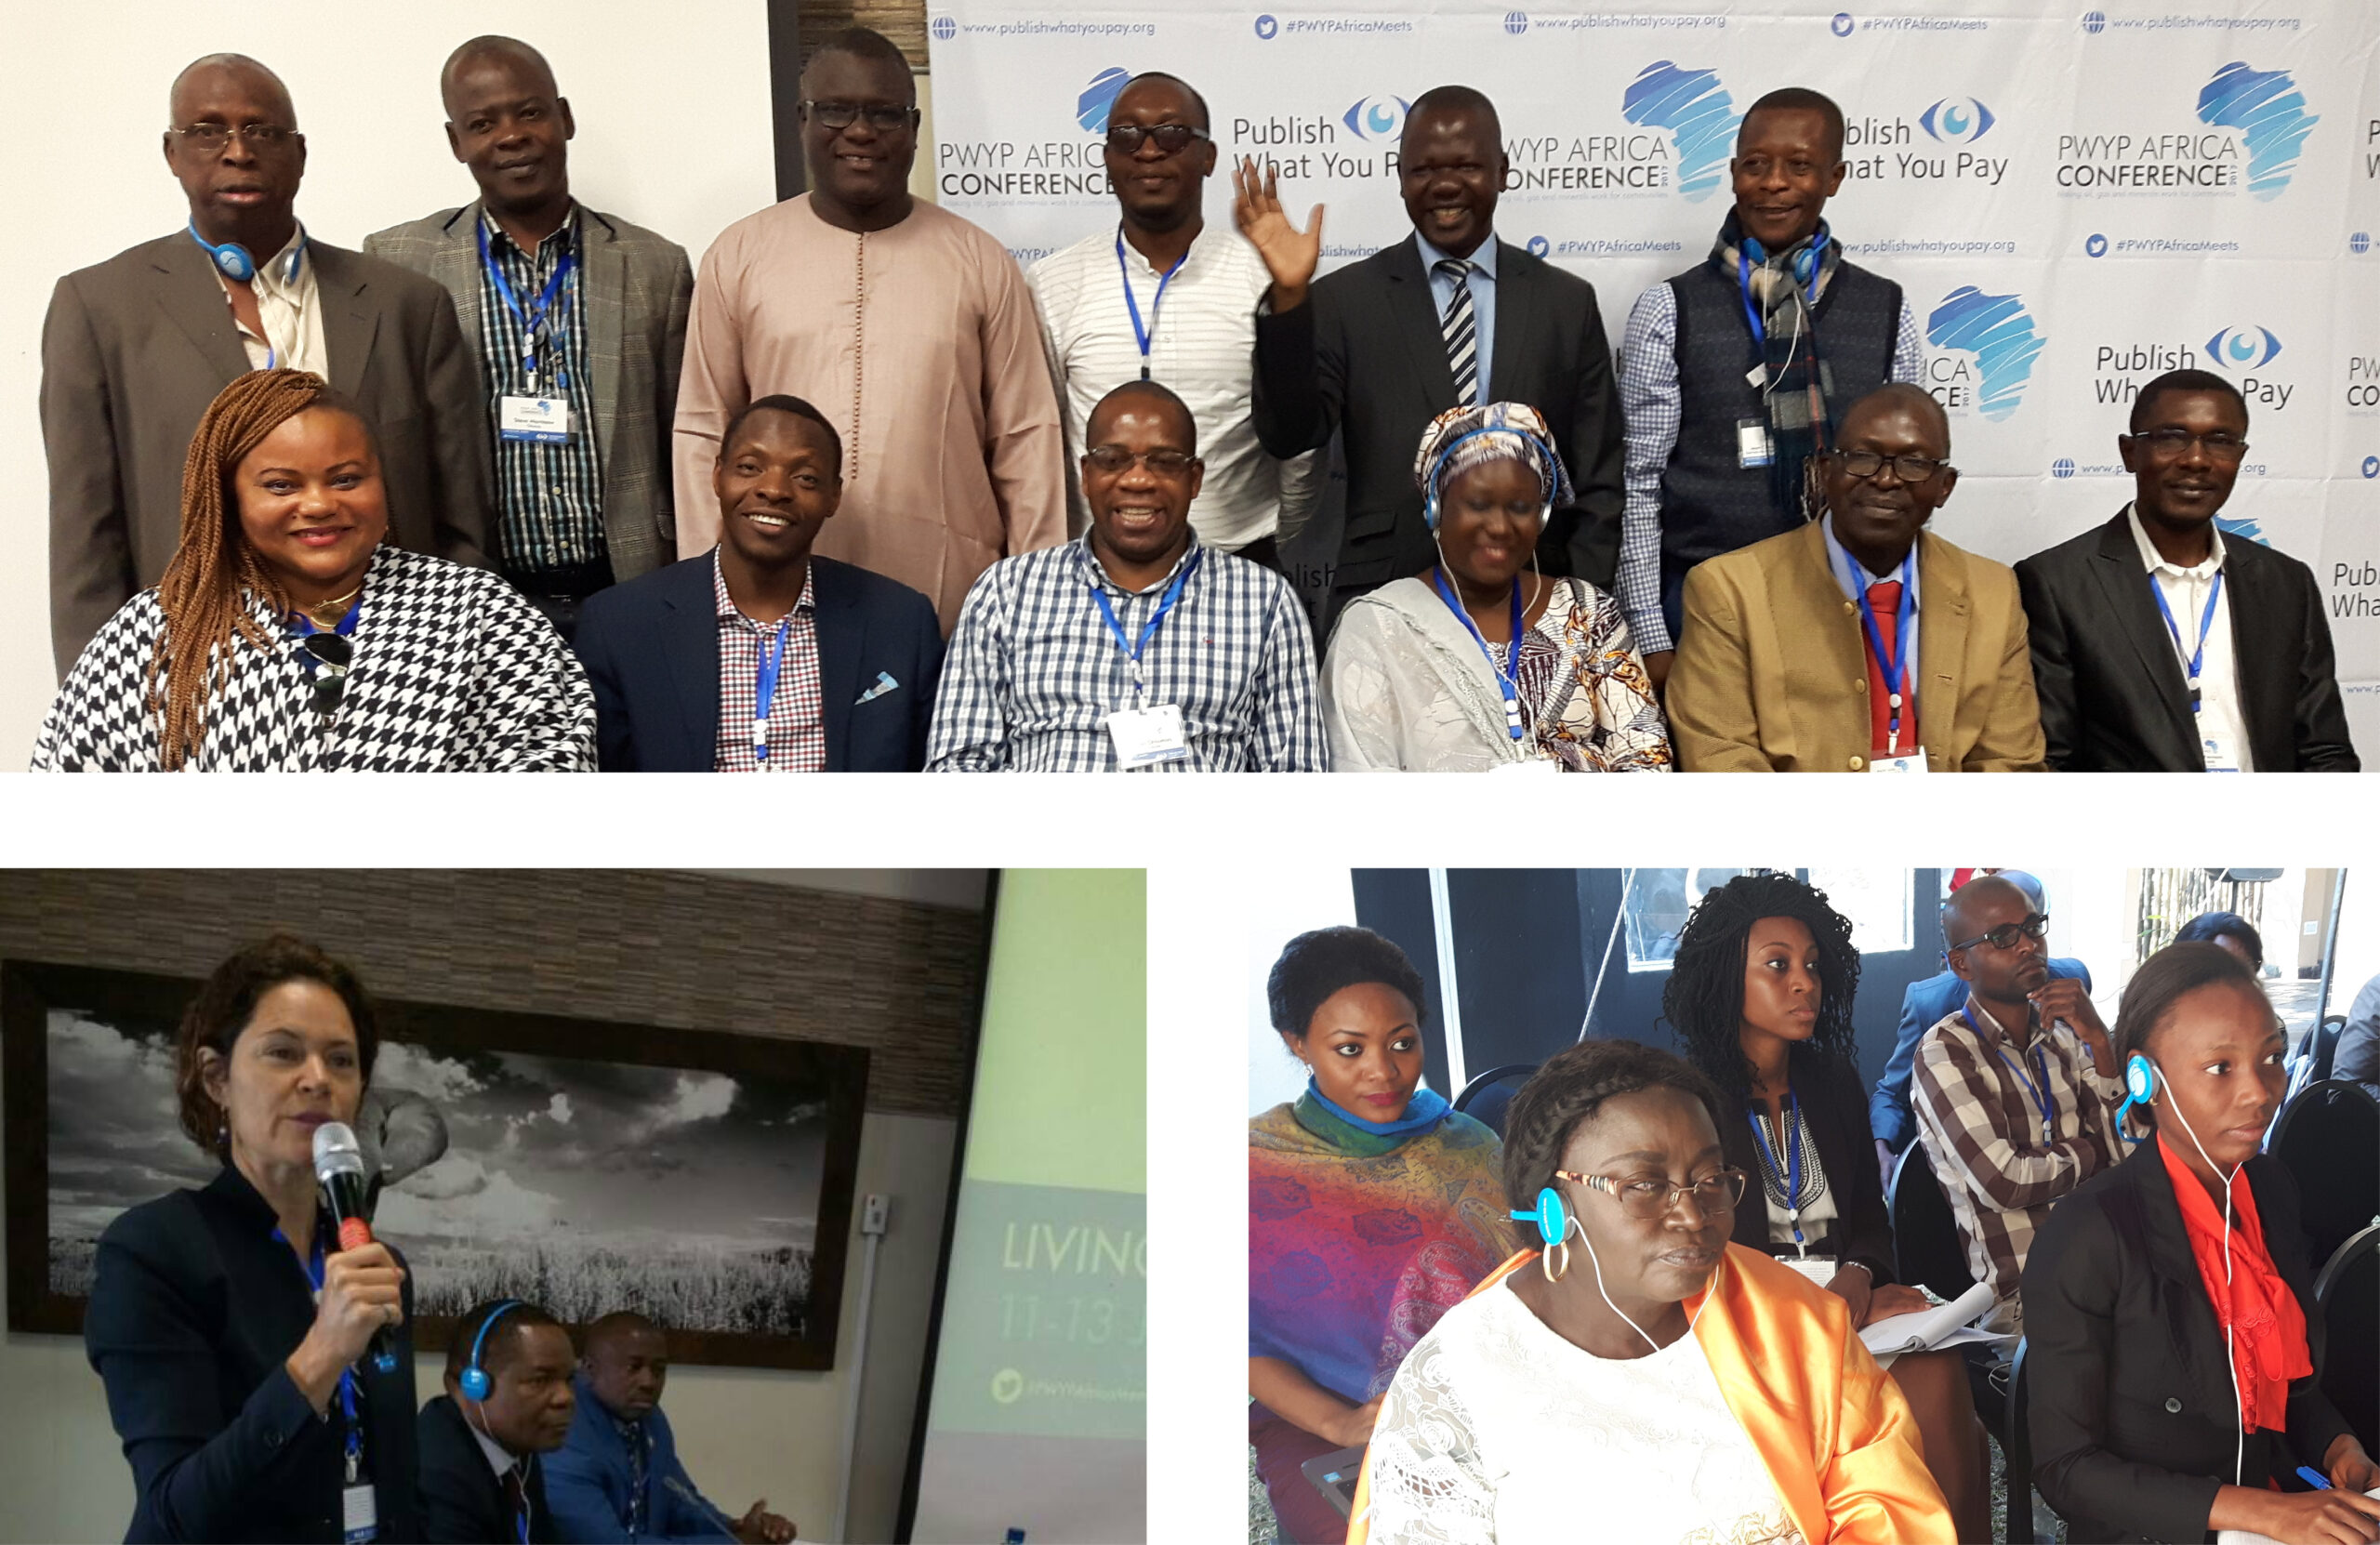 pictures of attendees at the PWYP Africa Conference